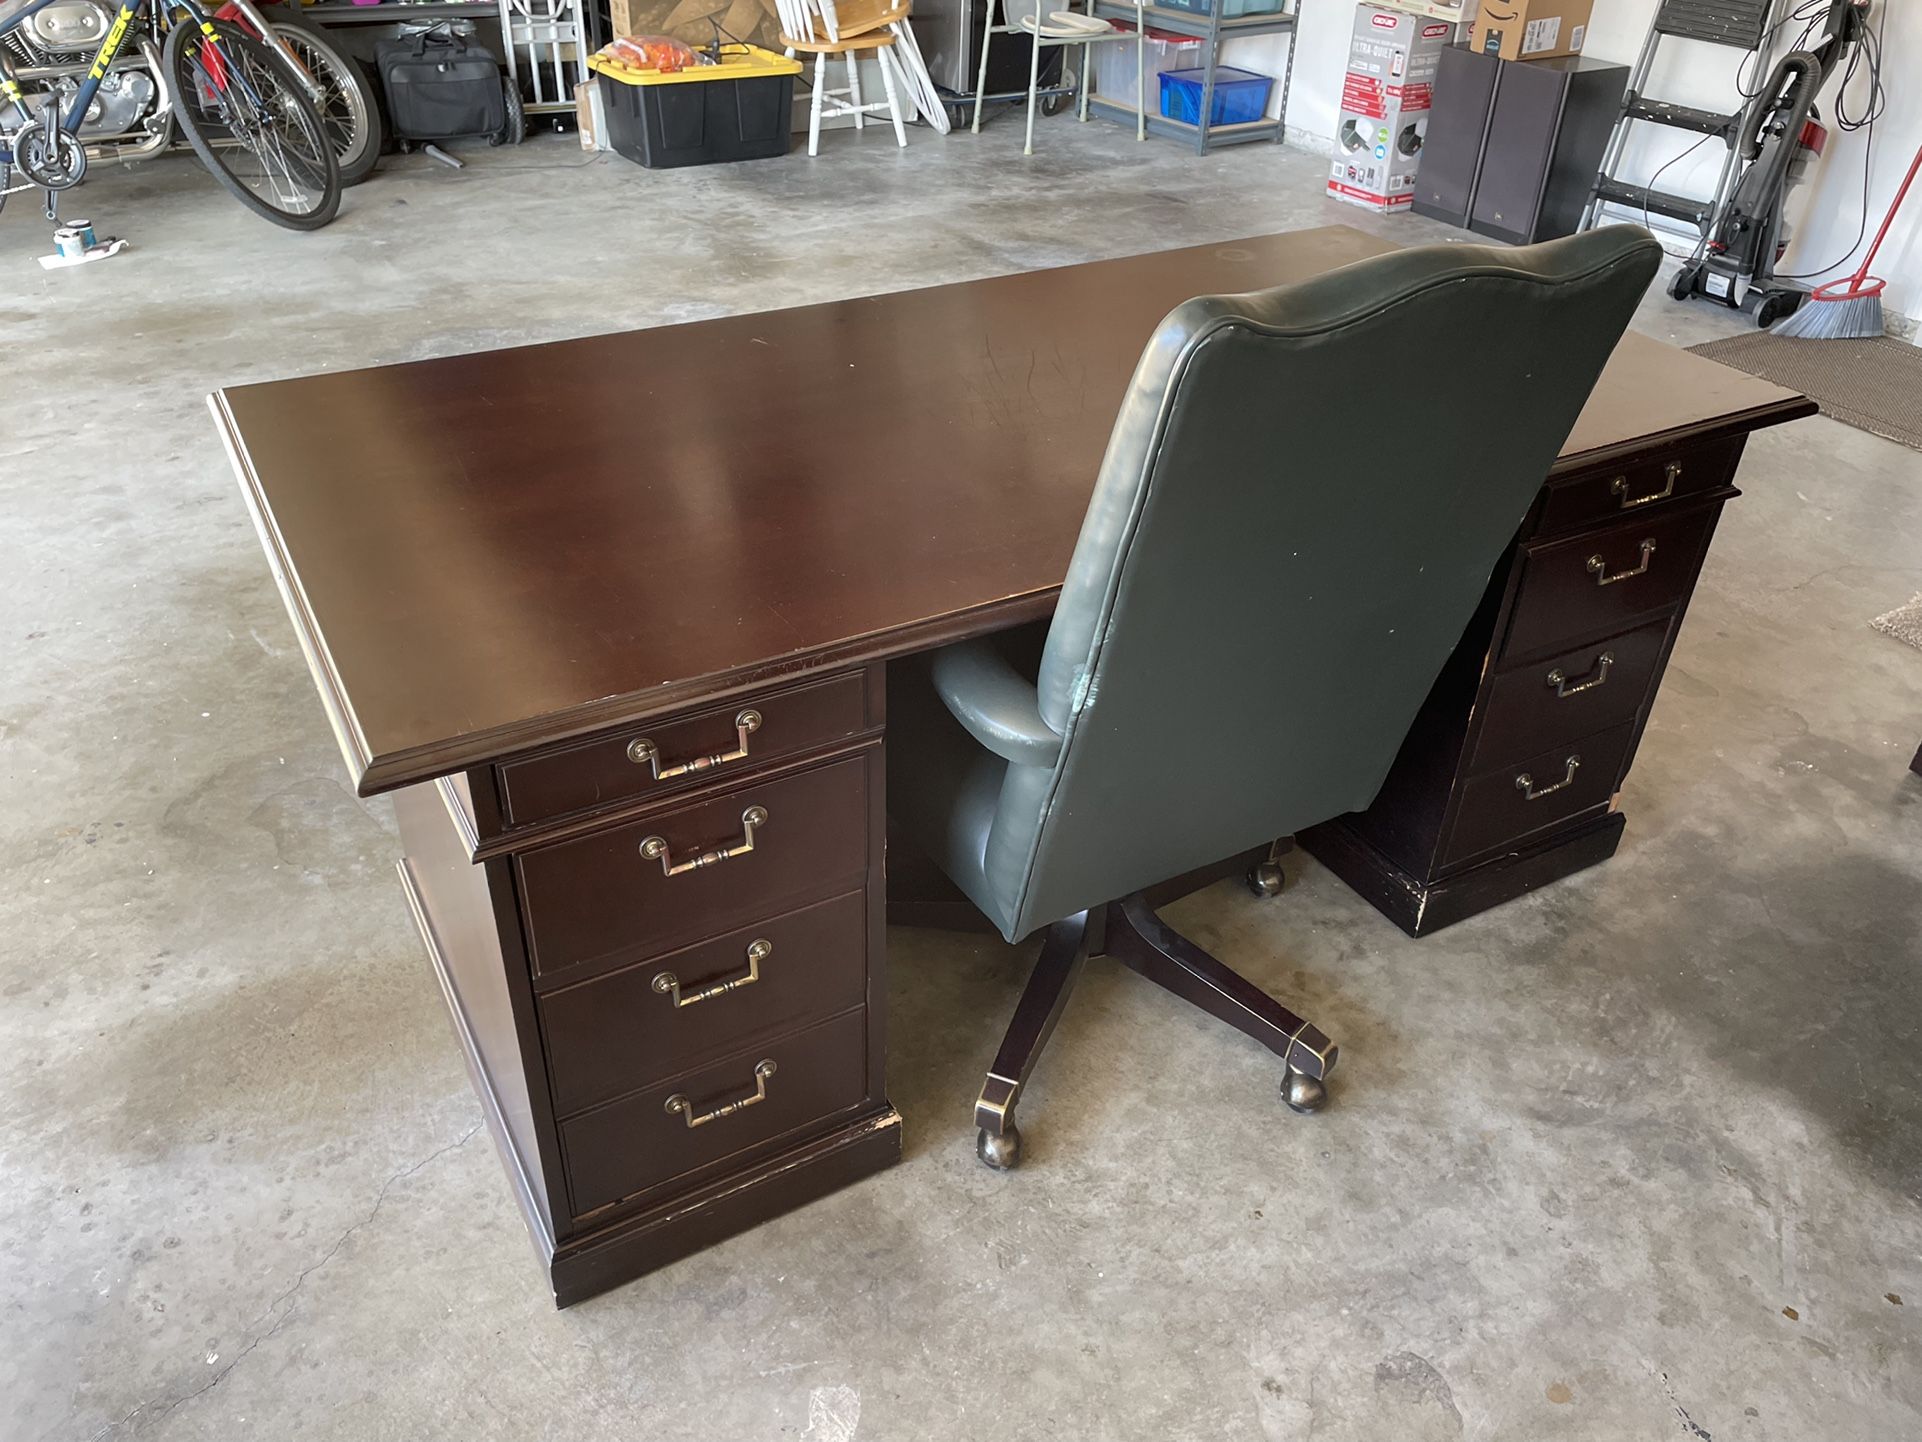 Complete Steelcase Office Furniture Set Available For FREE